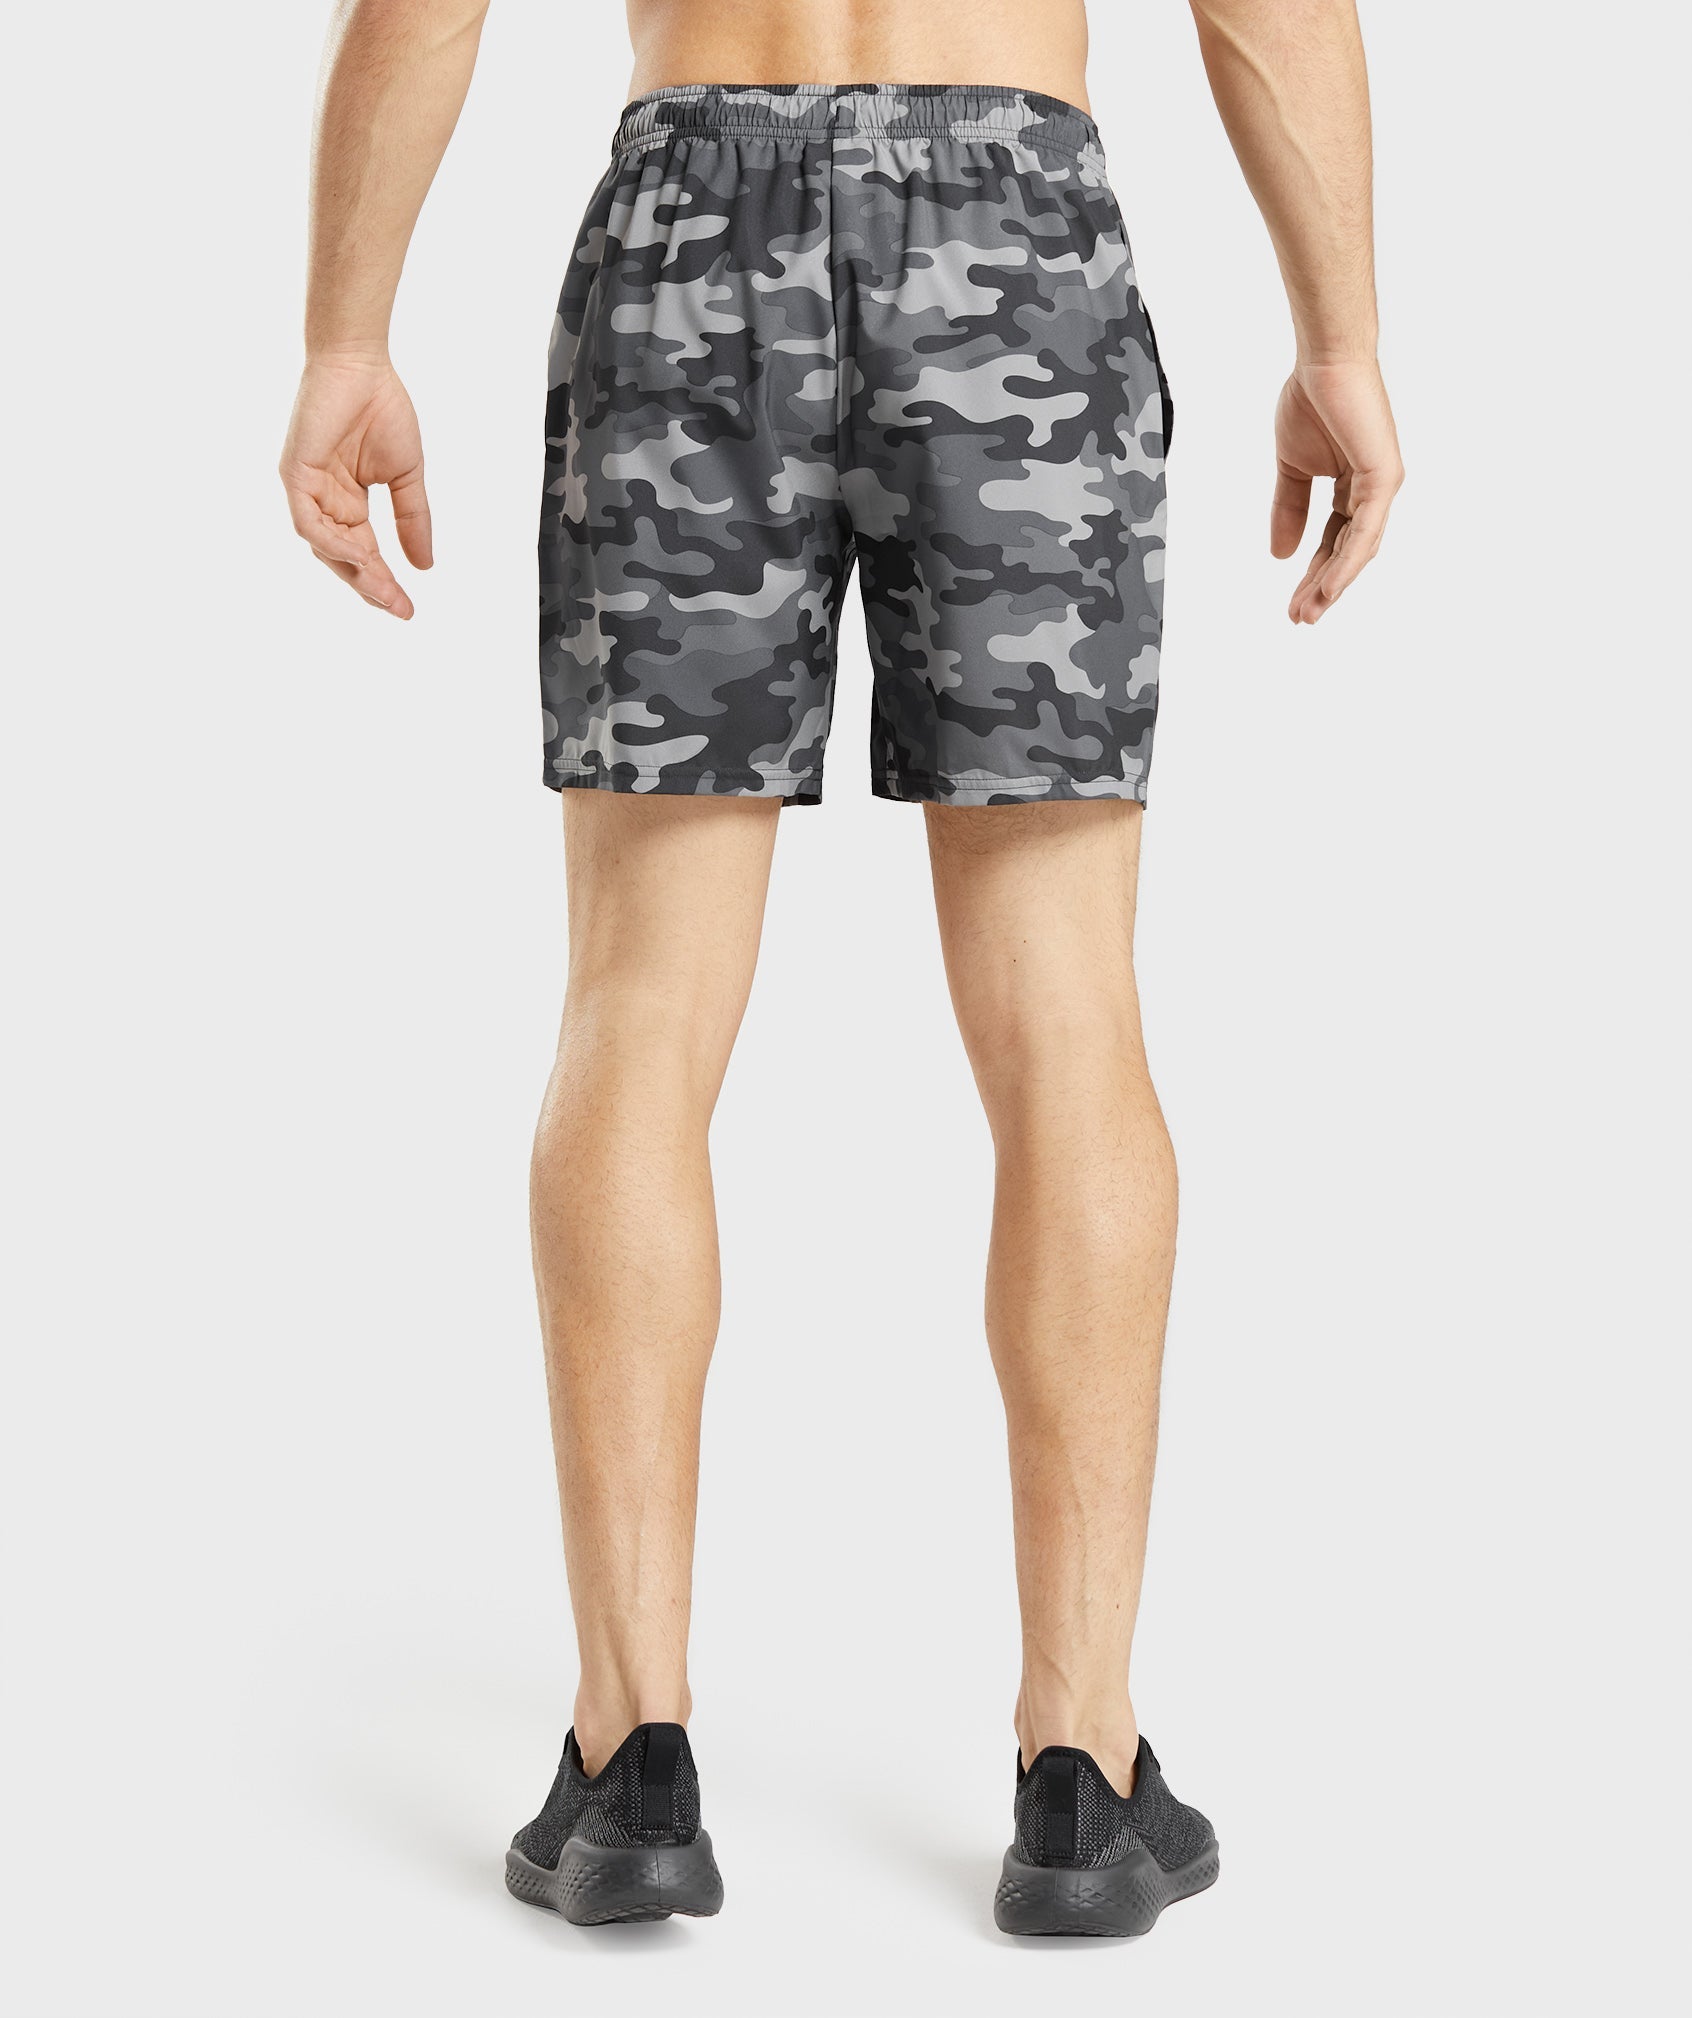 Arrival Shorts in Grey Print - view 2